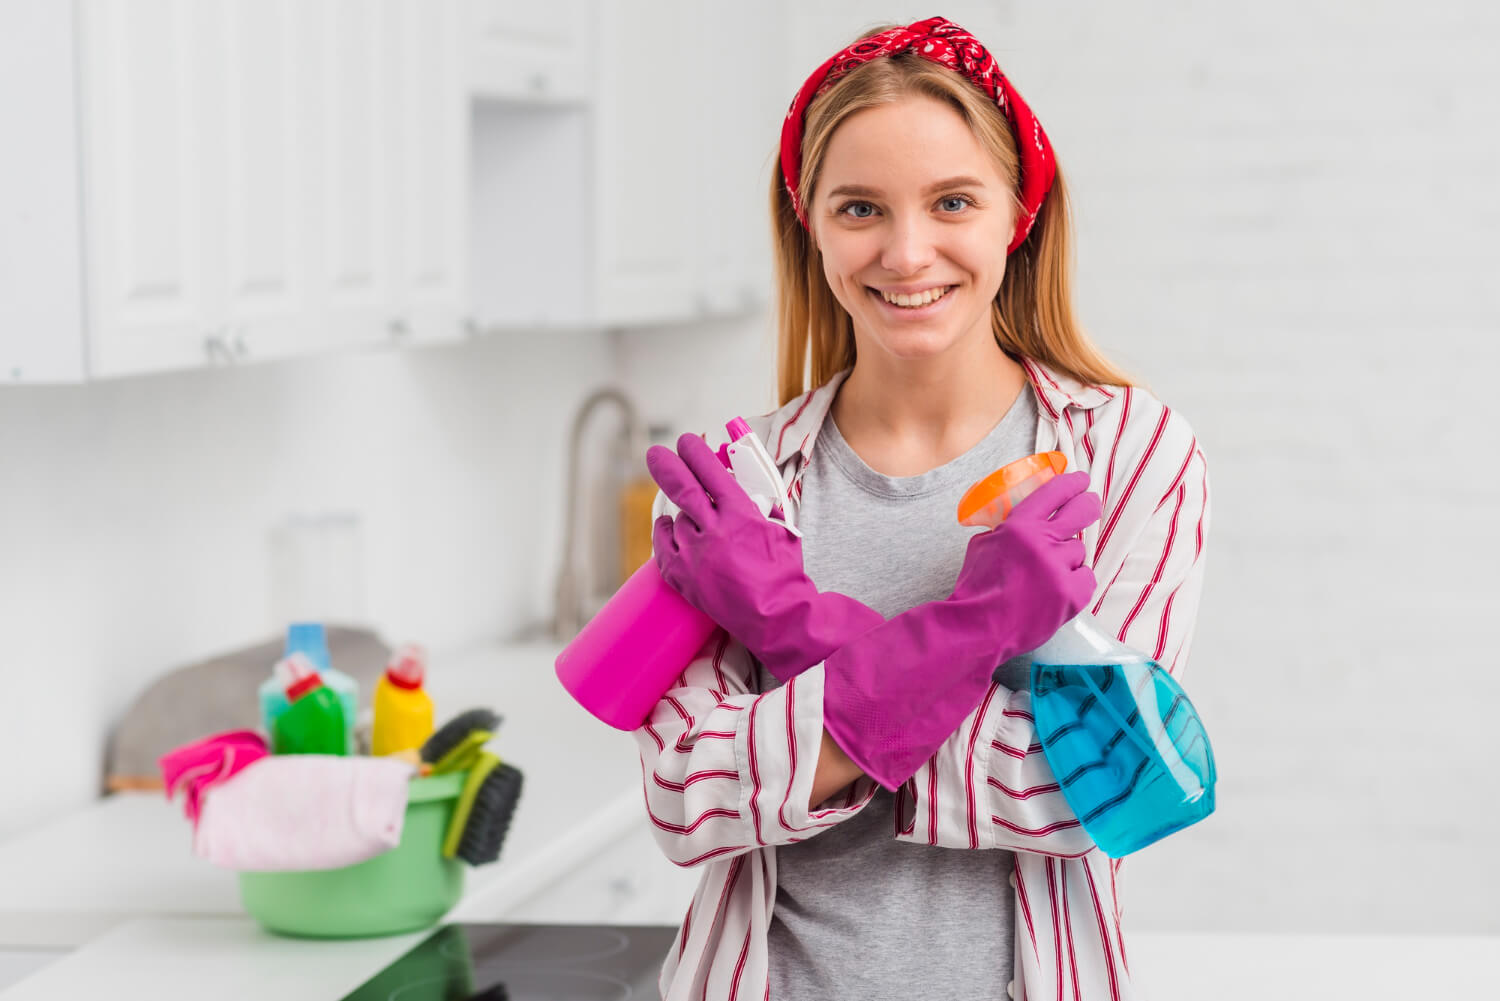 young woman in red headband and purple gloves smilling on camera prepared for cleaning while holding cleaning equipment